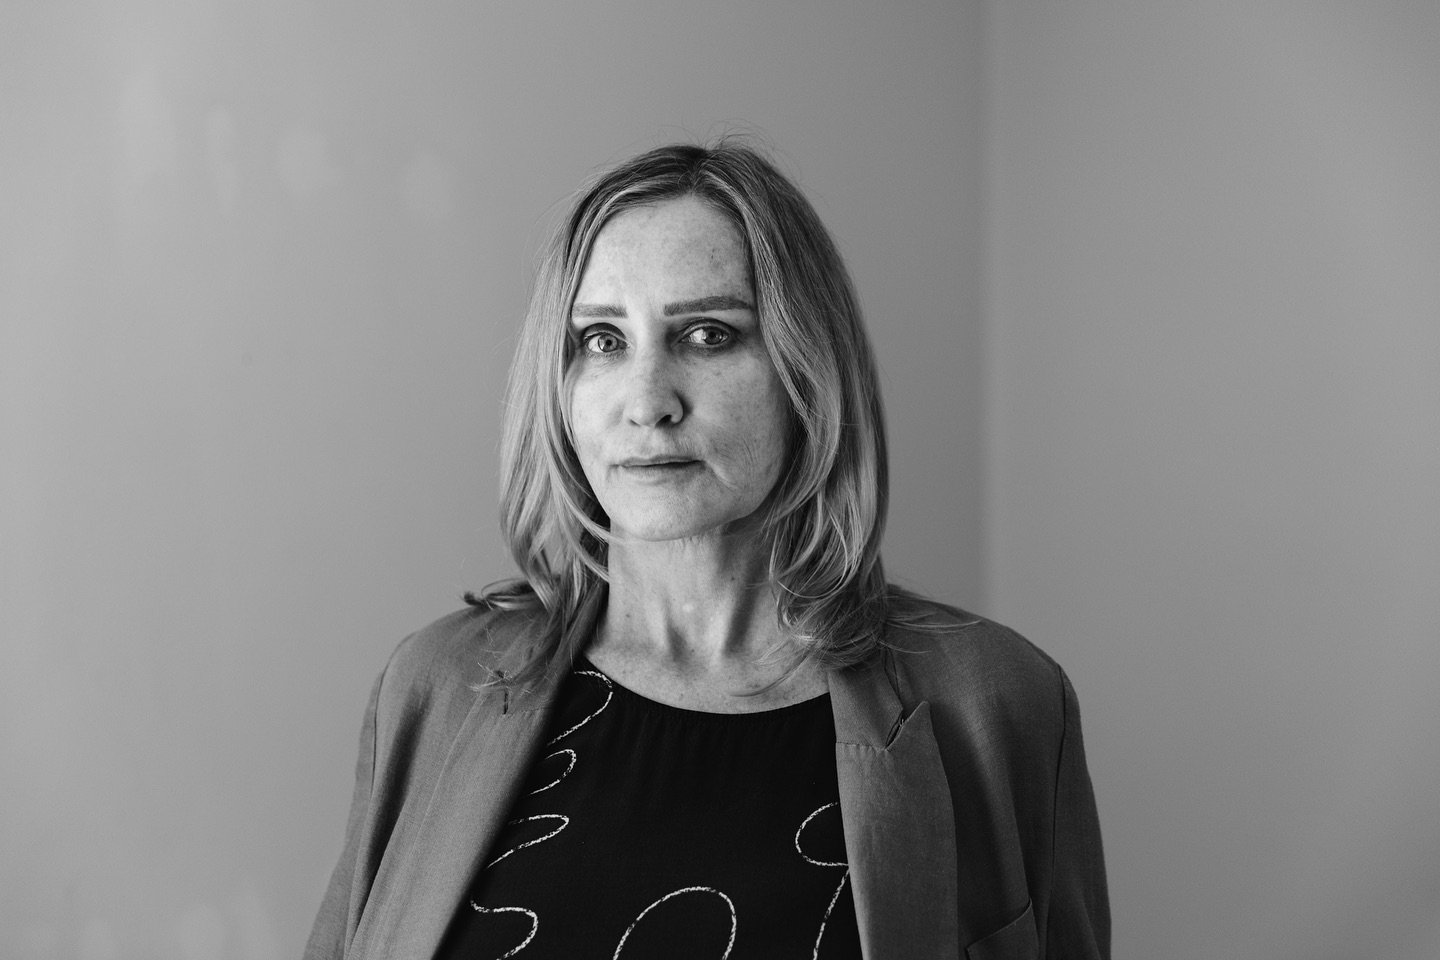 We are thrilled to announce the appointment of Melissa DeLaney as an Adjunct Senior Industry Fellow in RMIT School of Art.

Melissa DeLaney&nbsp;is Chief Executive Officer of Australian Network for Art &amp; Technology (ANAT) which has been at the fo